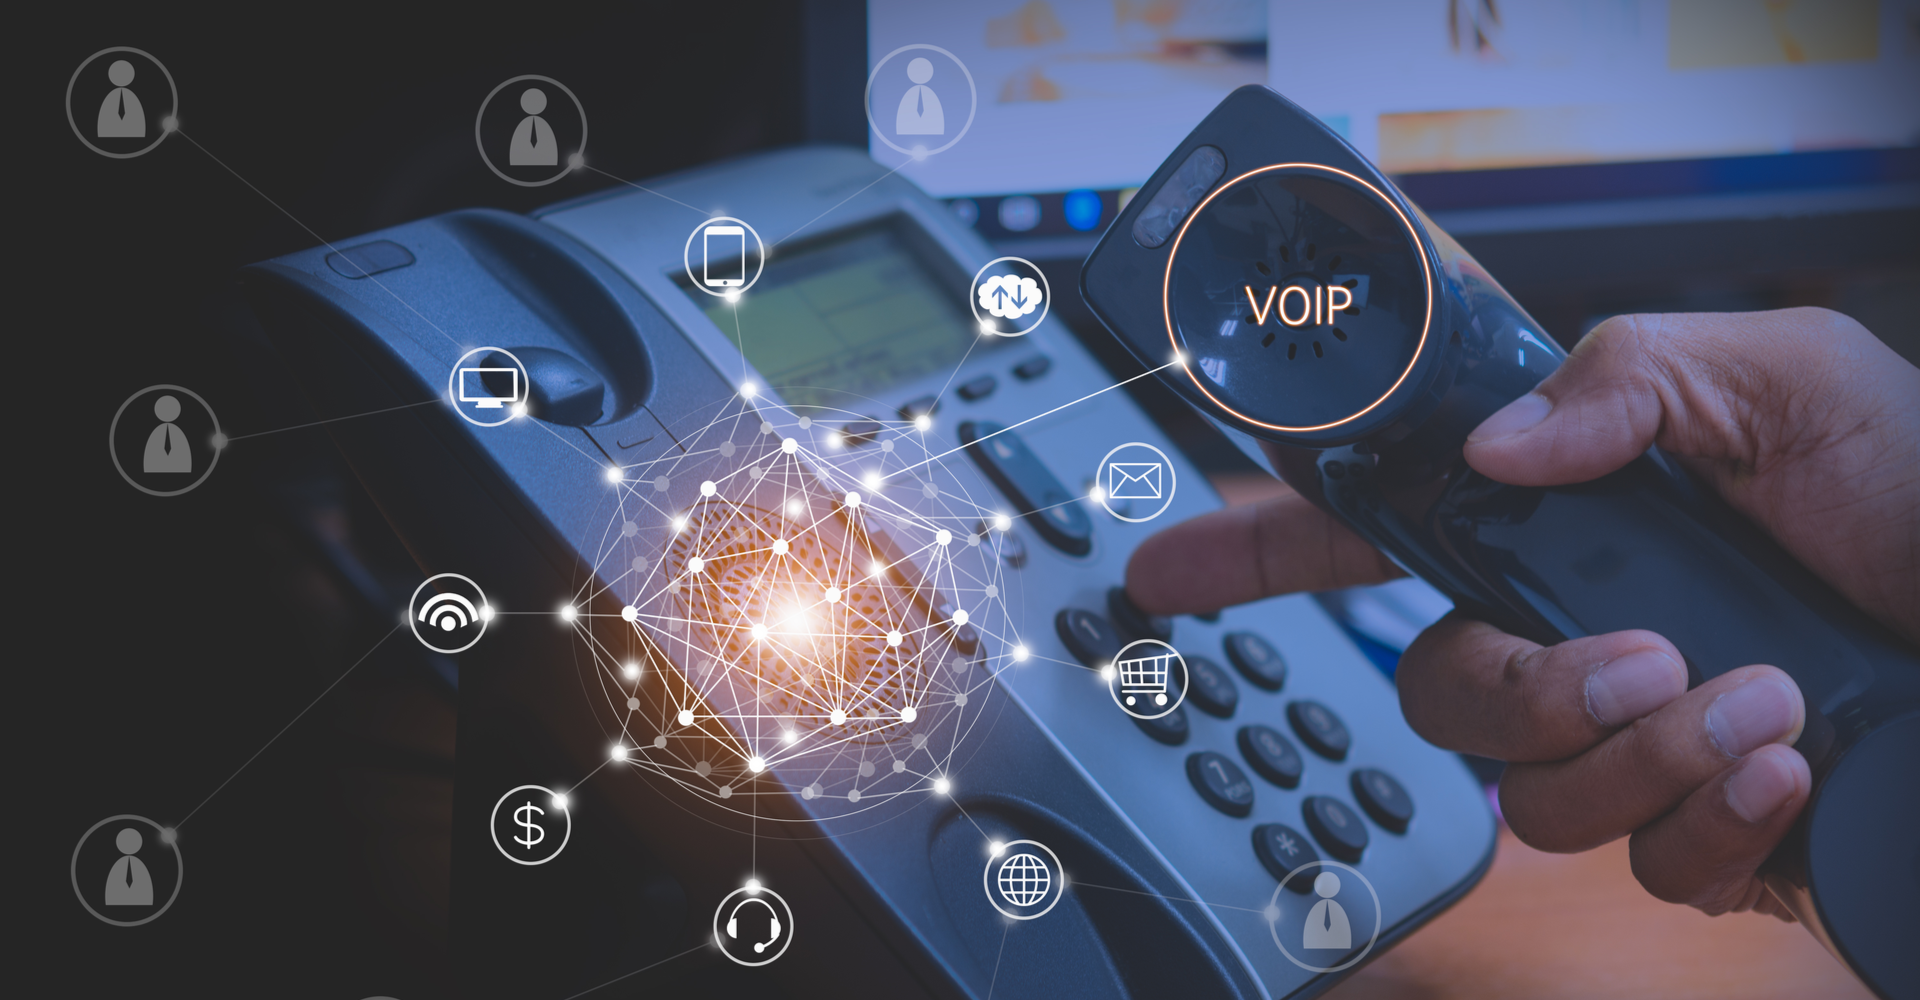 Traditional PBX telephone systems are hindering, not helping, your business